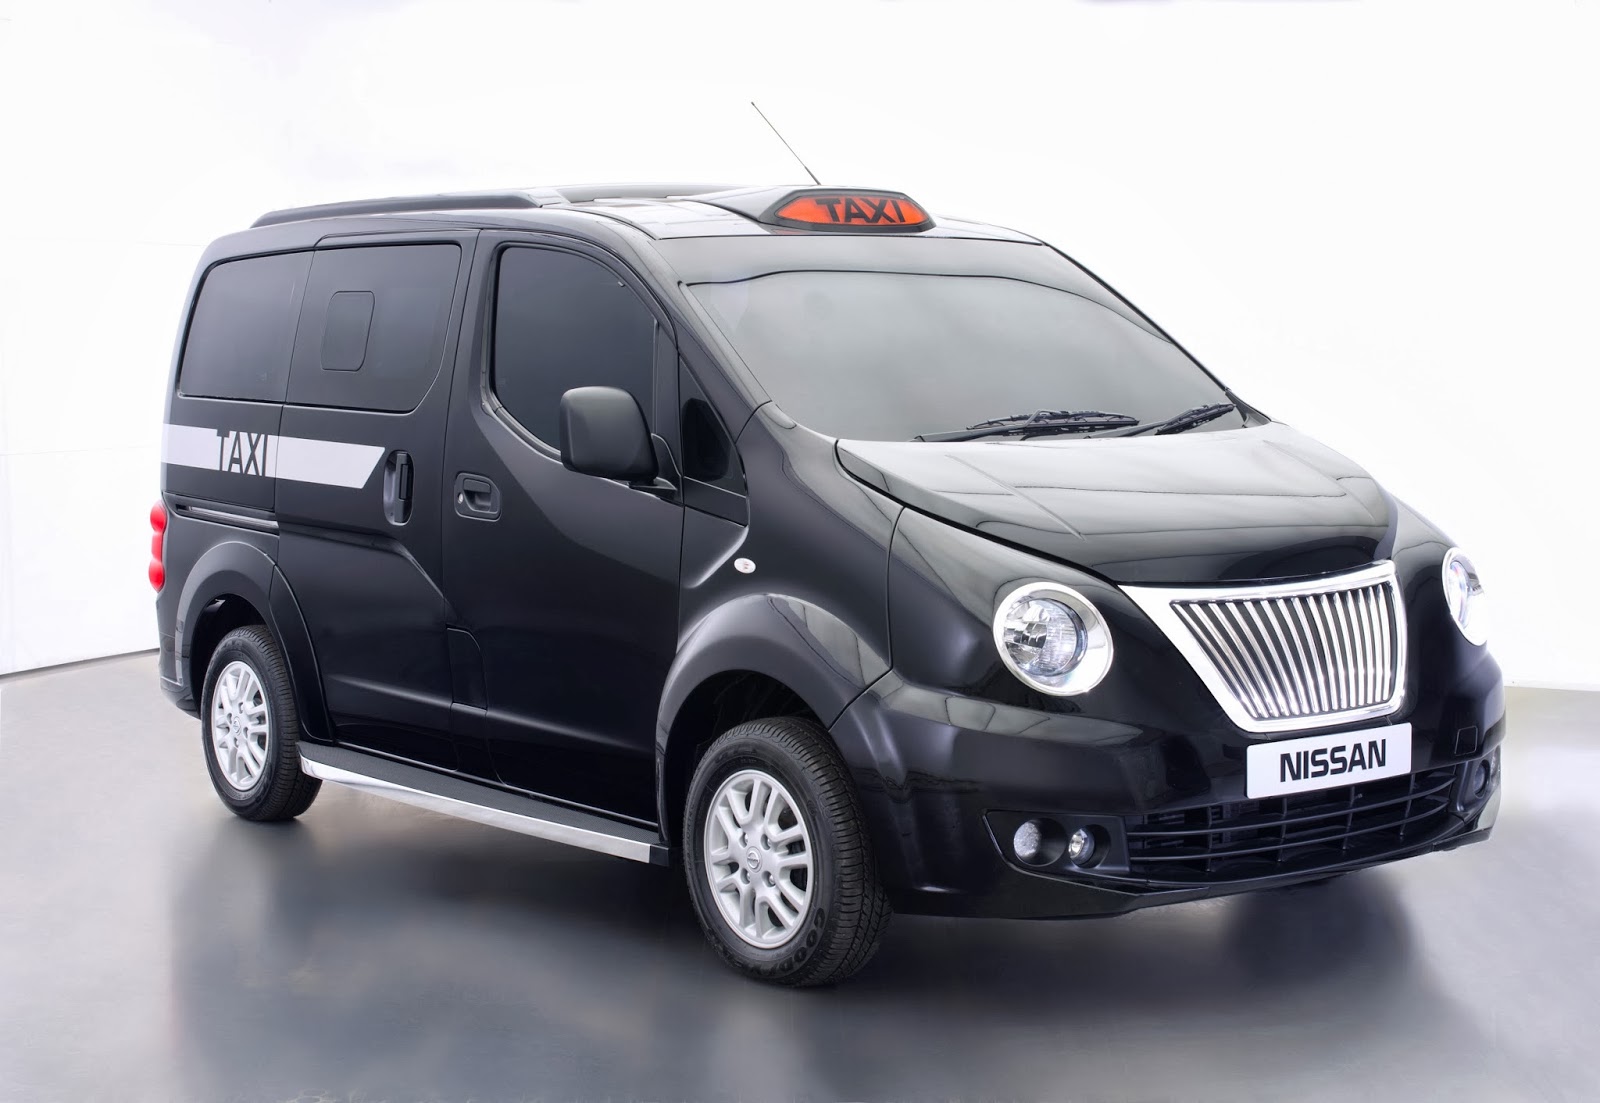 Nissan NV200 Taxi for London